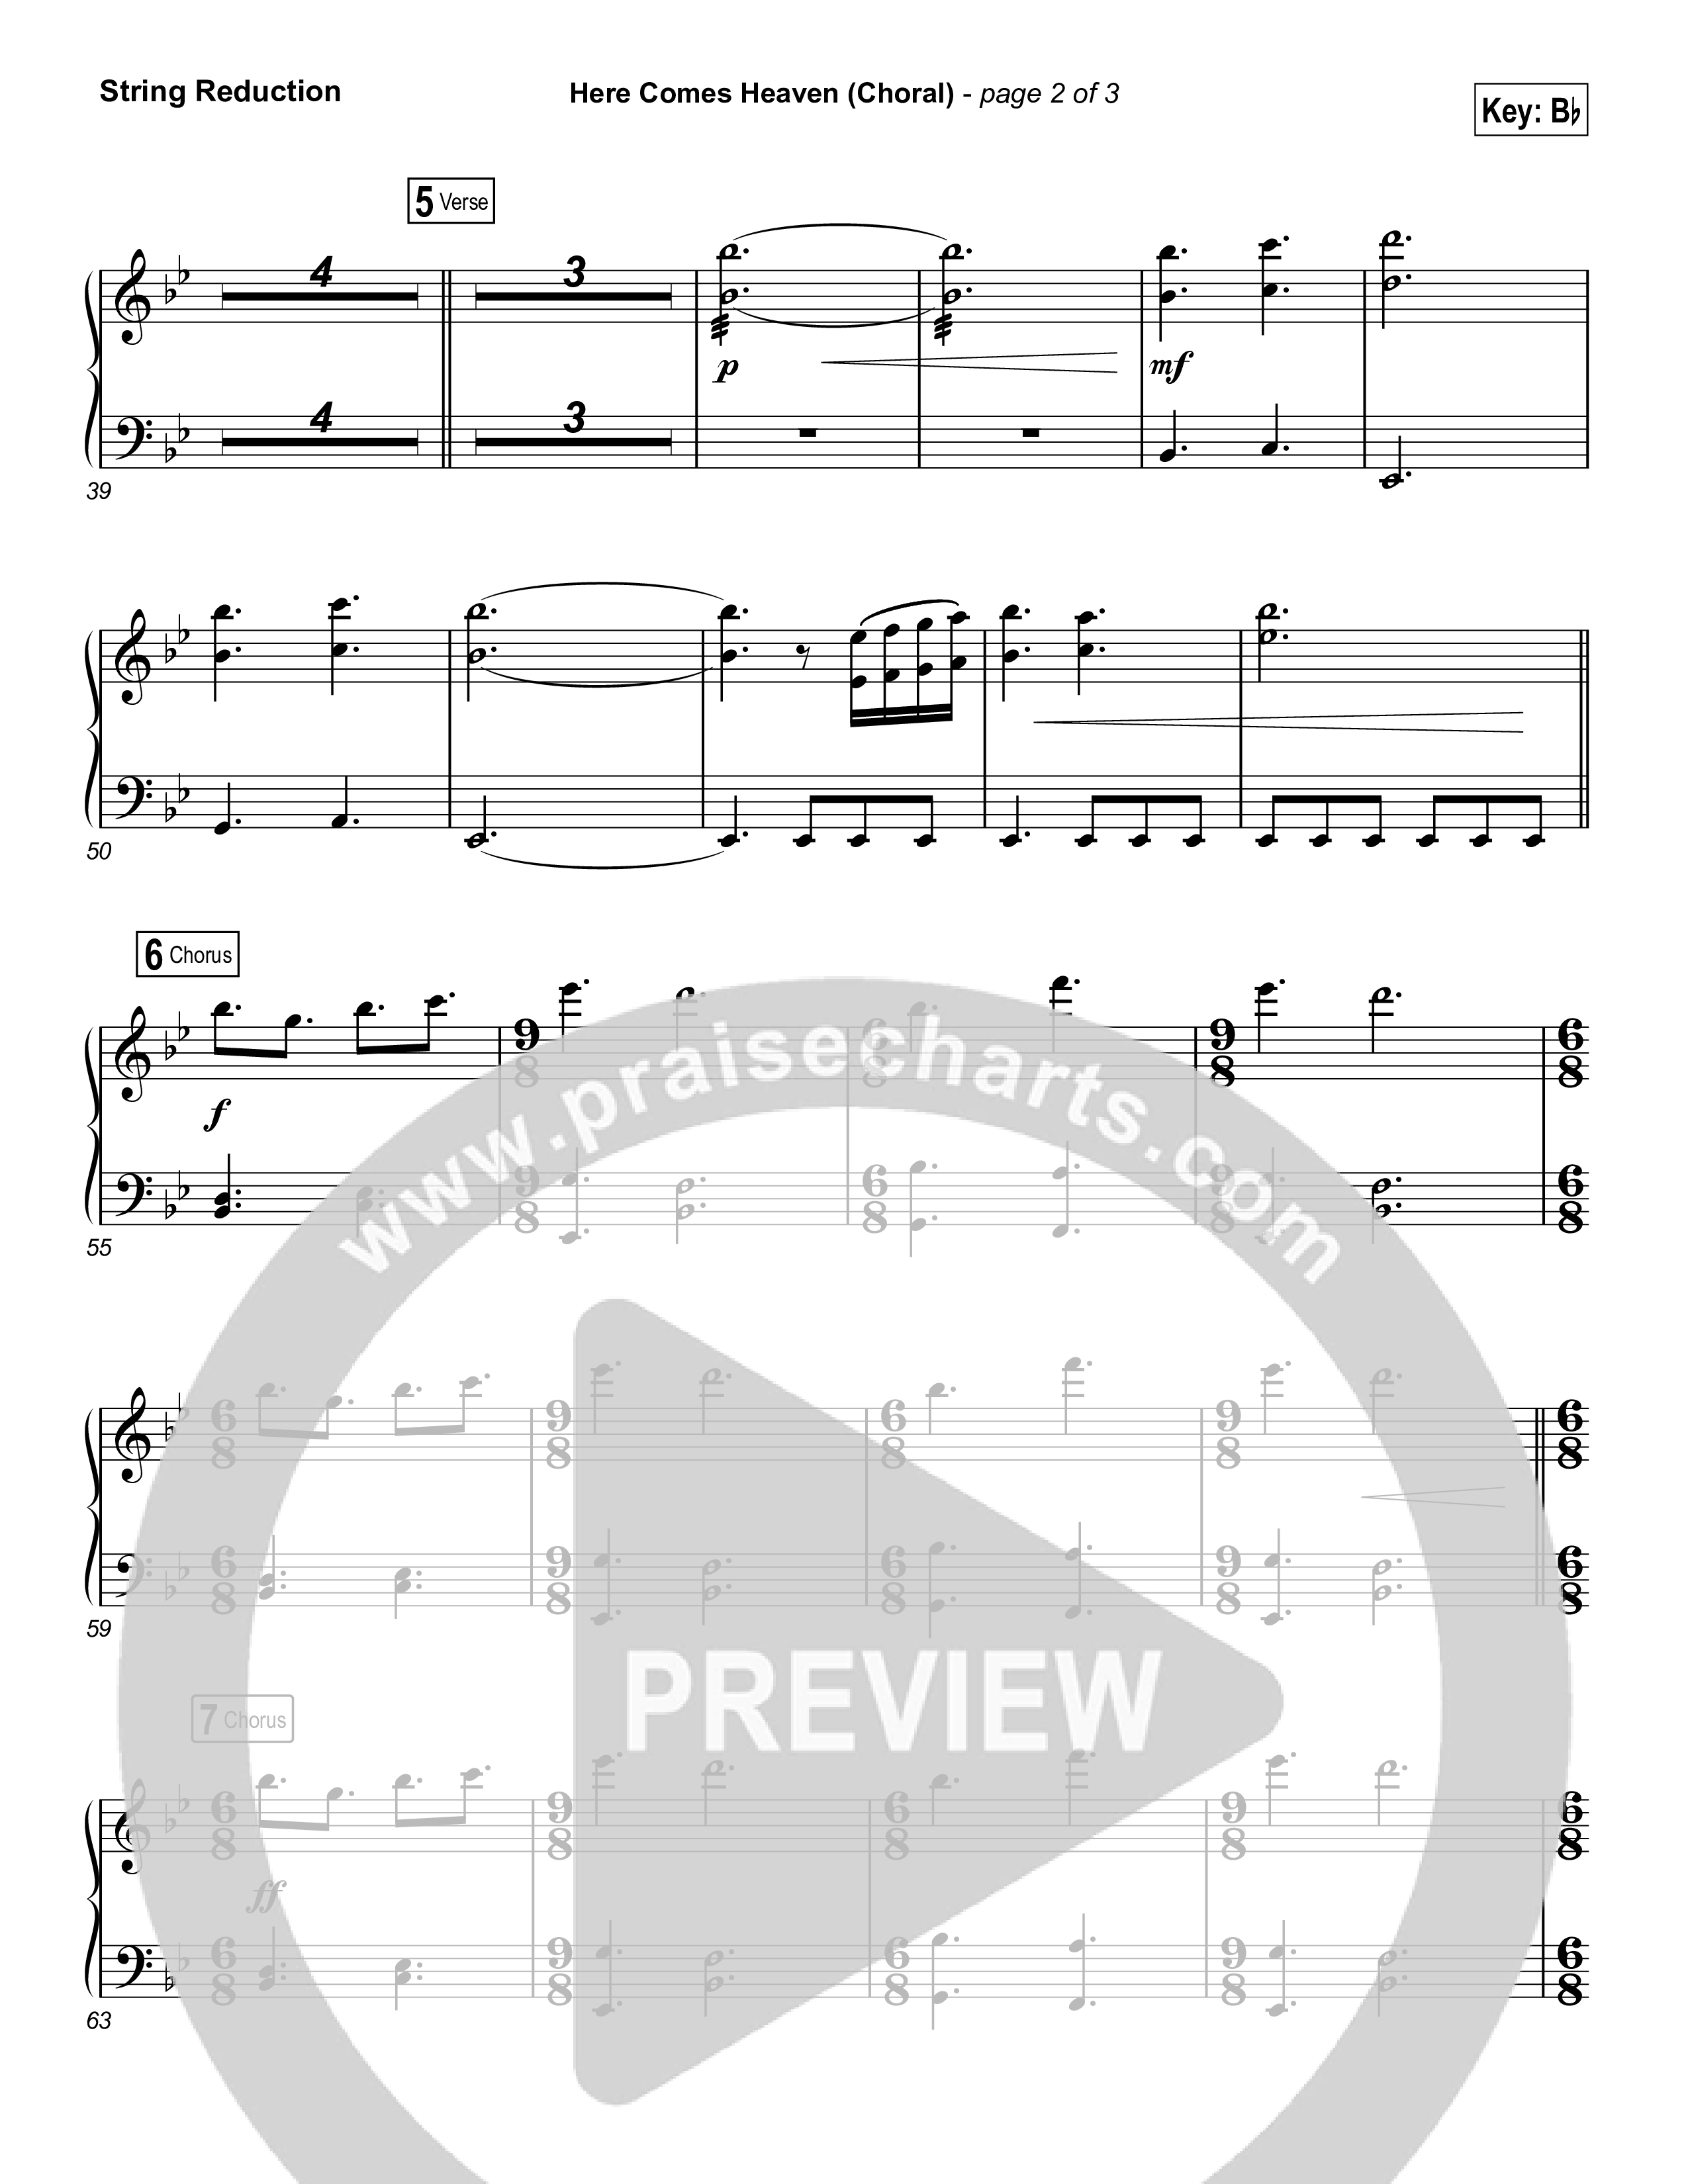 Here Comes Heaven (Choral Anthem SATB) String Reduction (Elevation Worship / Arr. Luke Gambill)